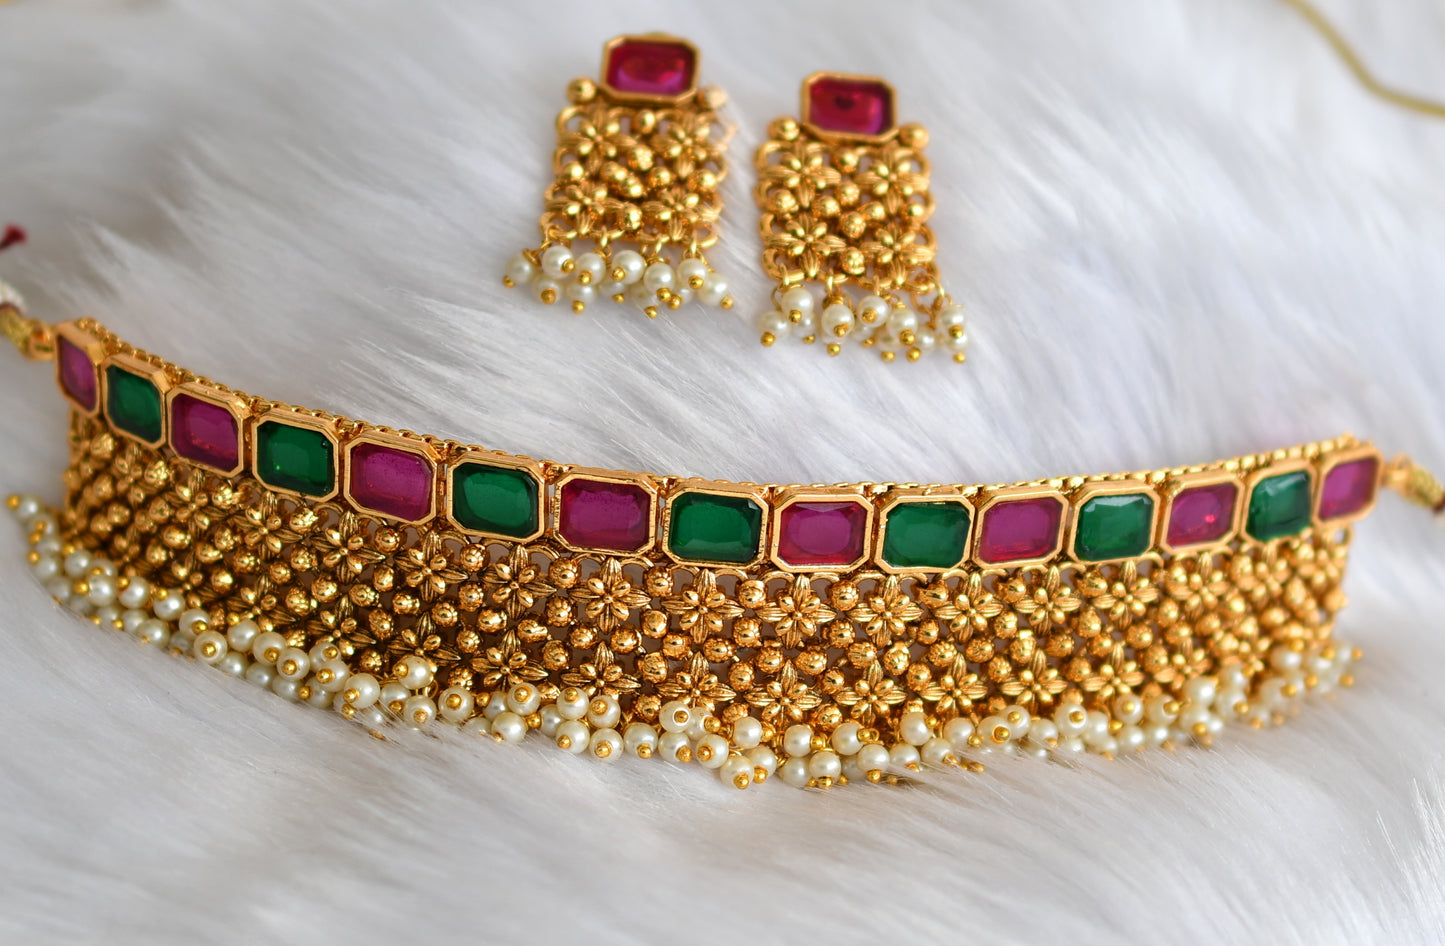 Antique gold tone pearl cluster ruby-green block stone choker necklace set dj-38709